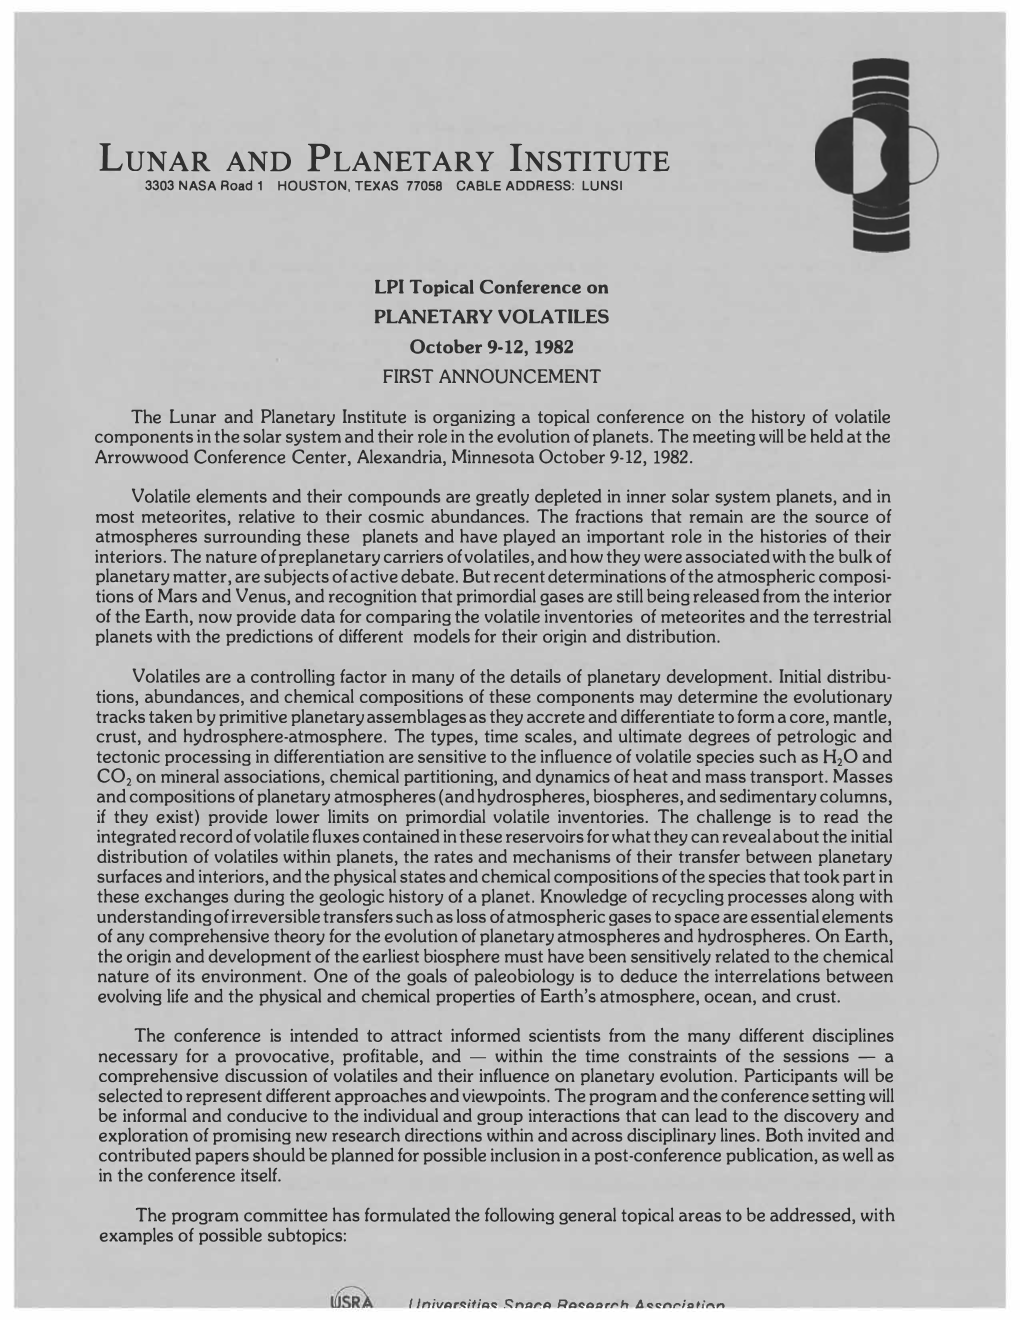 LPI Topical Conference on PLANETARY VOLATILES October 9-12, 1982 FIRST ANNOUNCEMENT